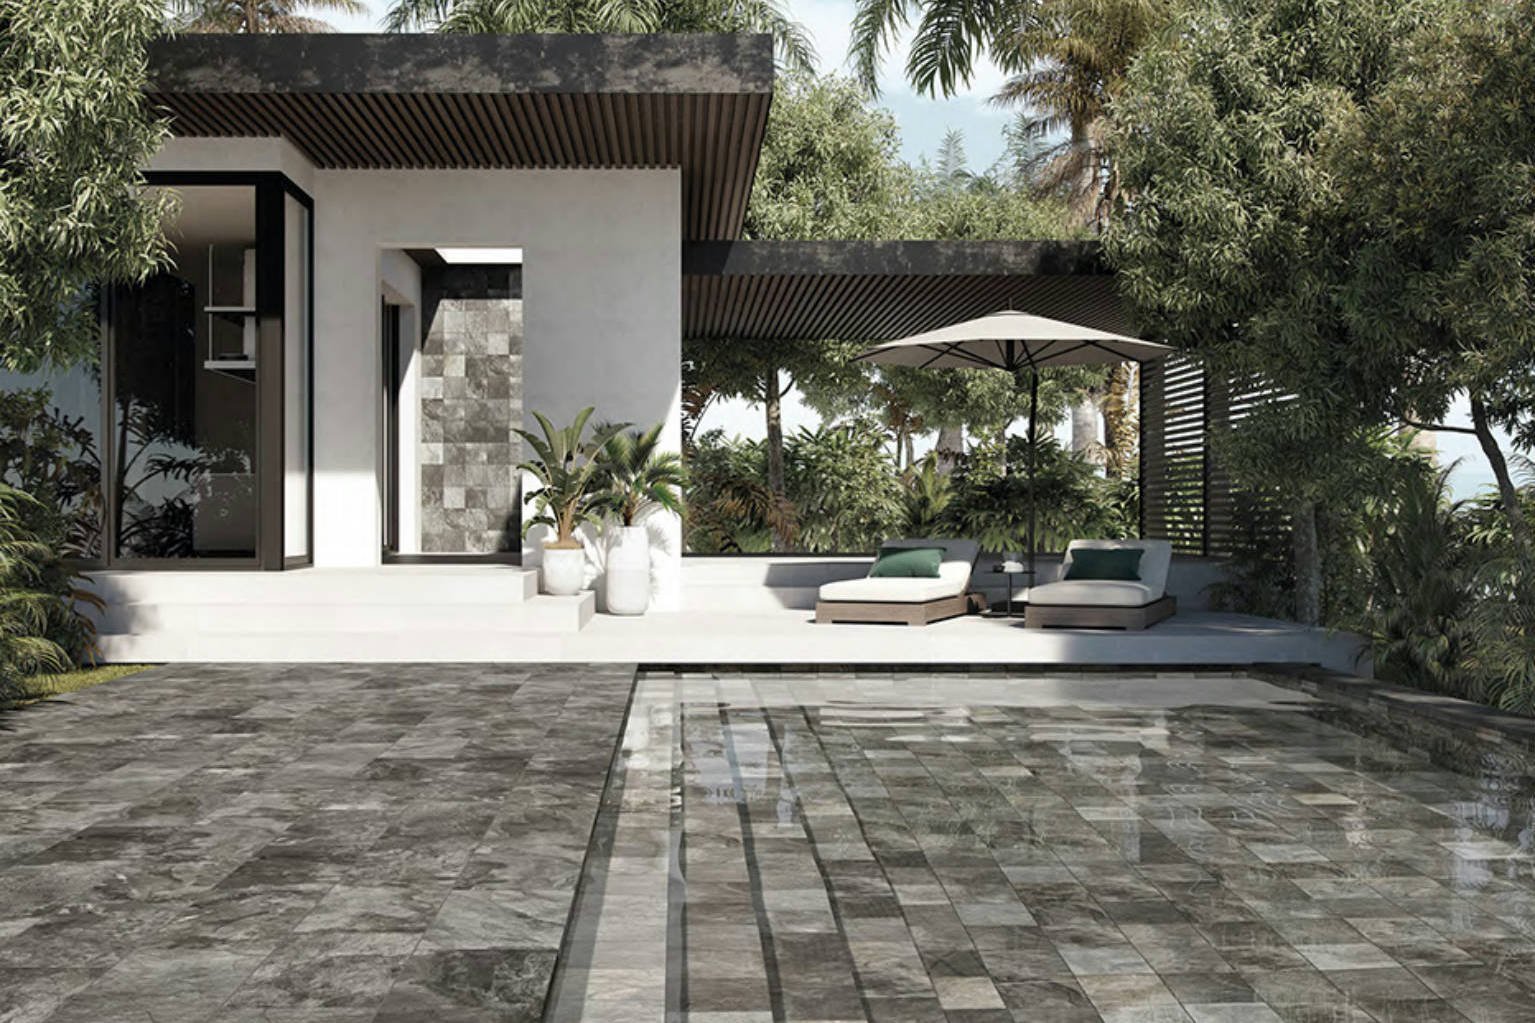 Nepal Slate Pokhara Pizzara 12x24 | Qualis Ceramica | Luxury Tile and Vinyl at affordable prices